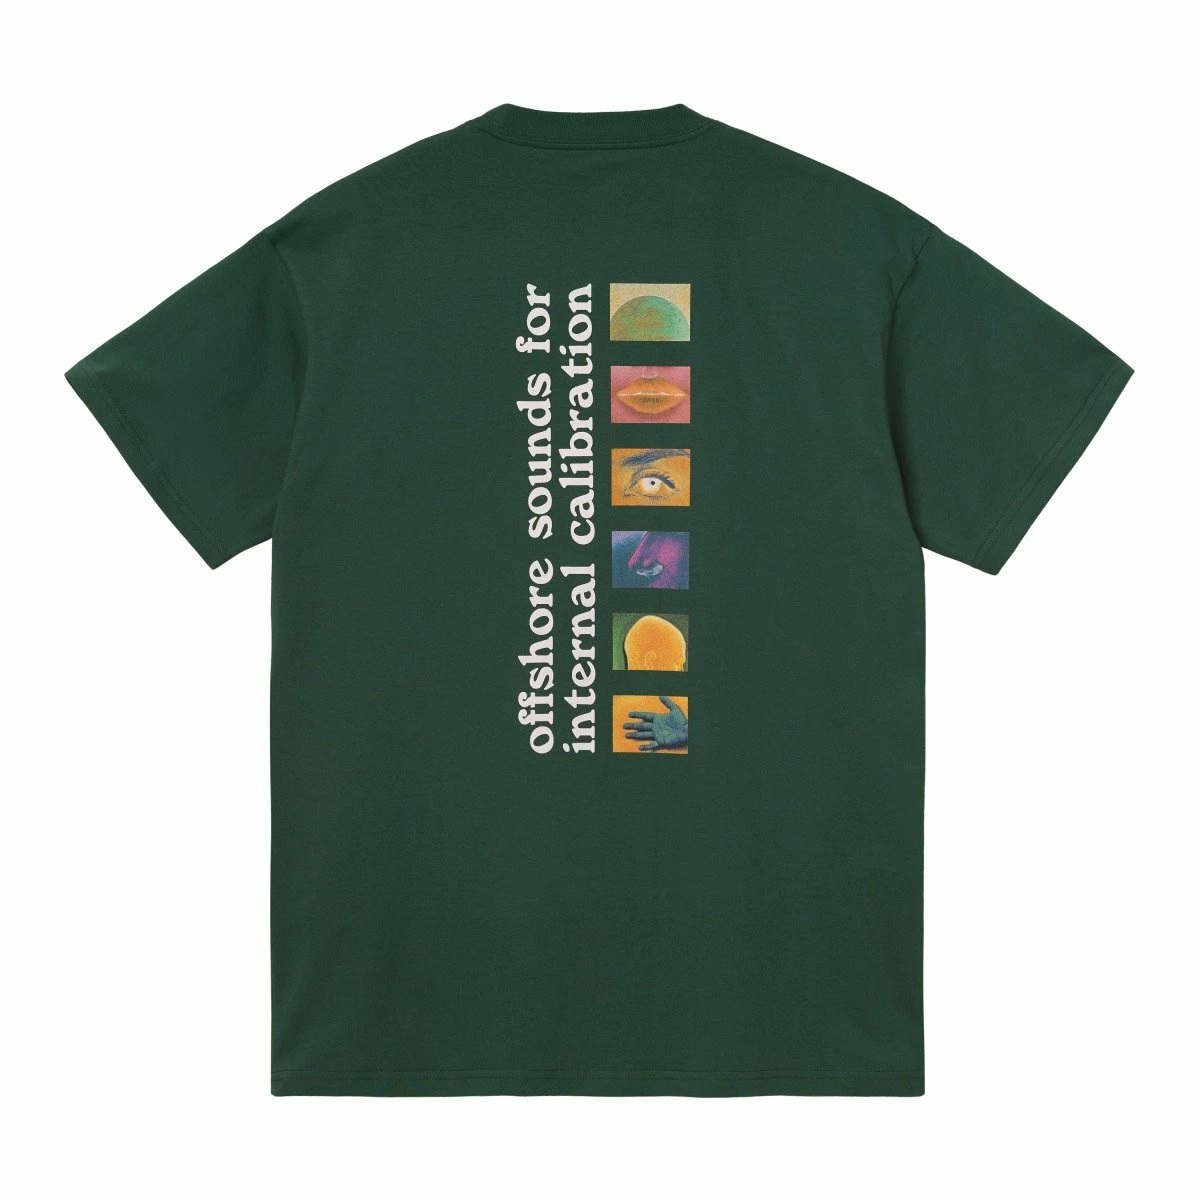 CARHARTT WIP S/S CALIBRATE T-SHIRT (Treehouse) I029017 公式通販